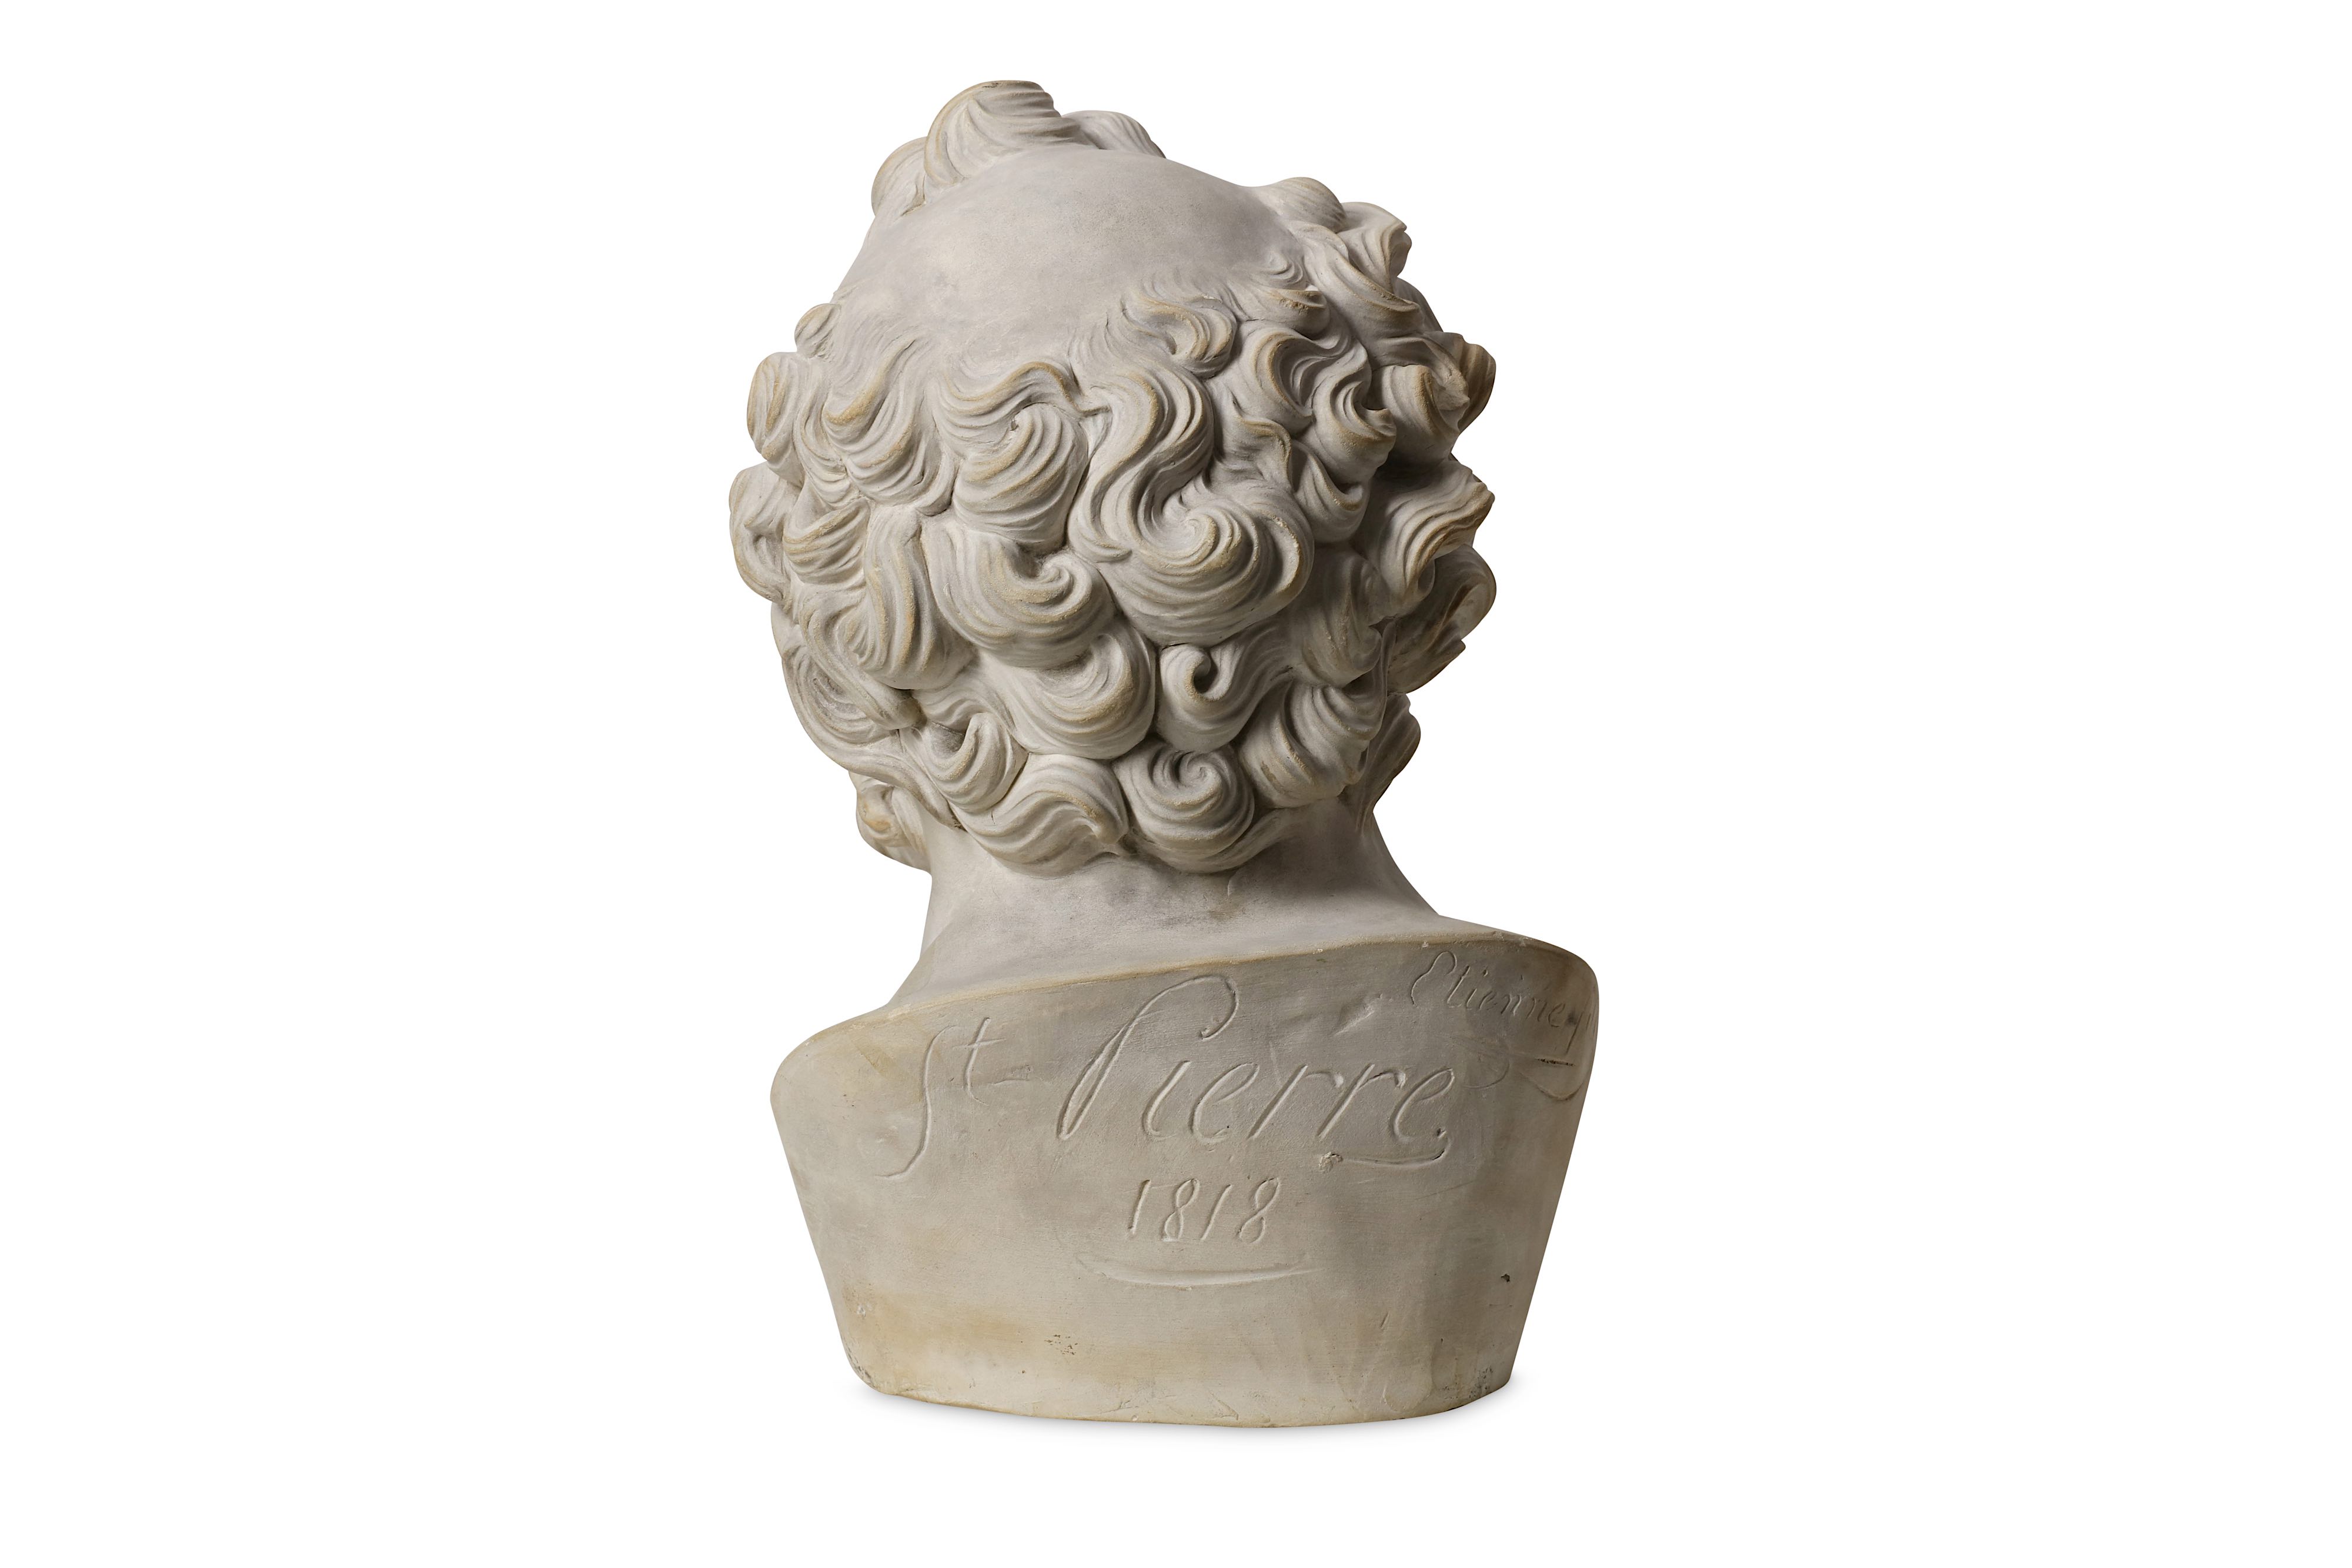 AFTER ALESSANDRO ALGARDI (ITALIAN, 1598-1654): A CLAY HEAD OF ST PIERRE SIGNED 'ETIENNE FILS 1818' - Image 3 of 6